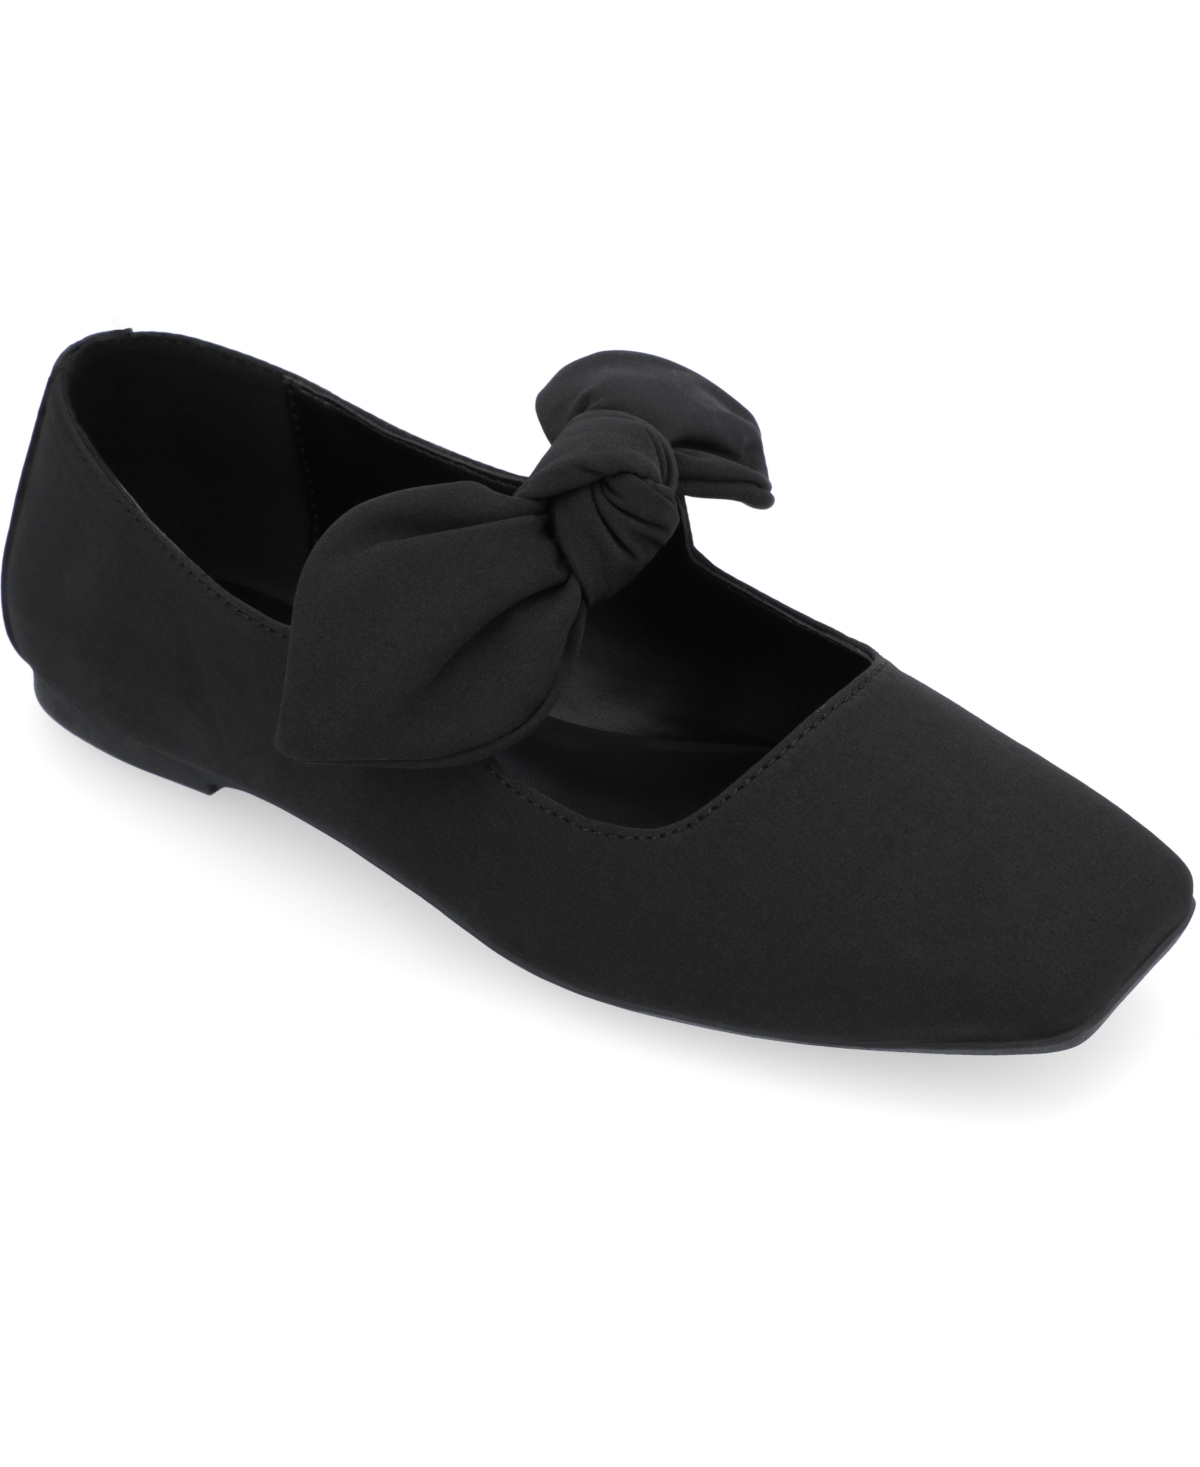 Retro Vintage Flats and Low Heel Shoes Journee Collection Womens Seralinn Bow Flats - Black $56.24 AT vintagedancer.com